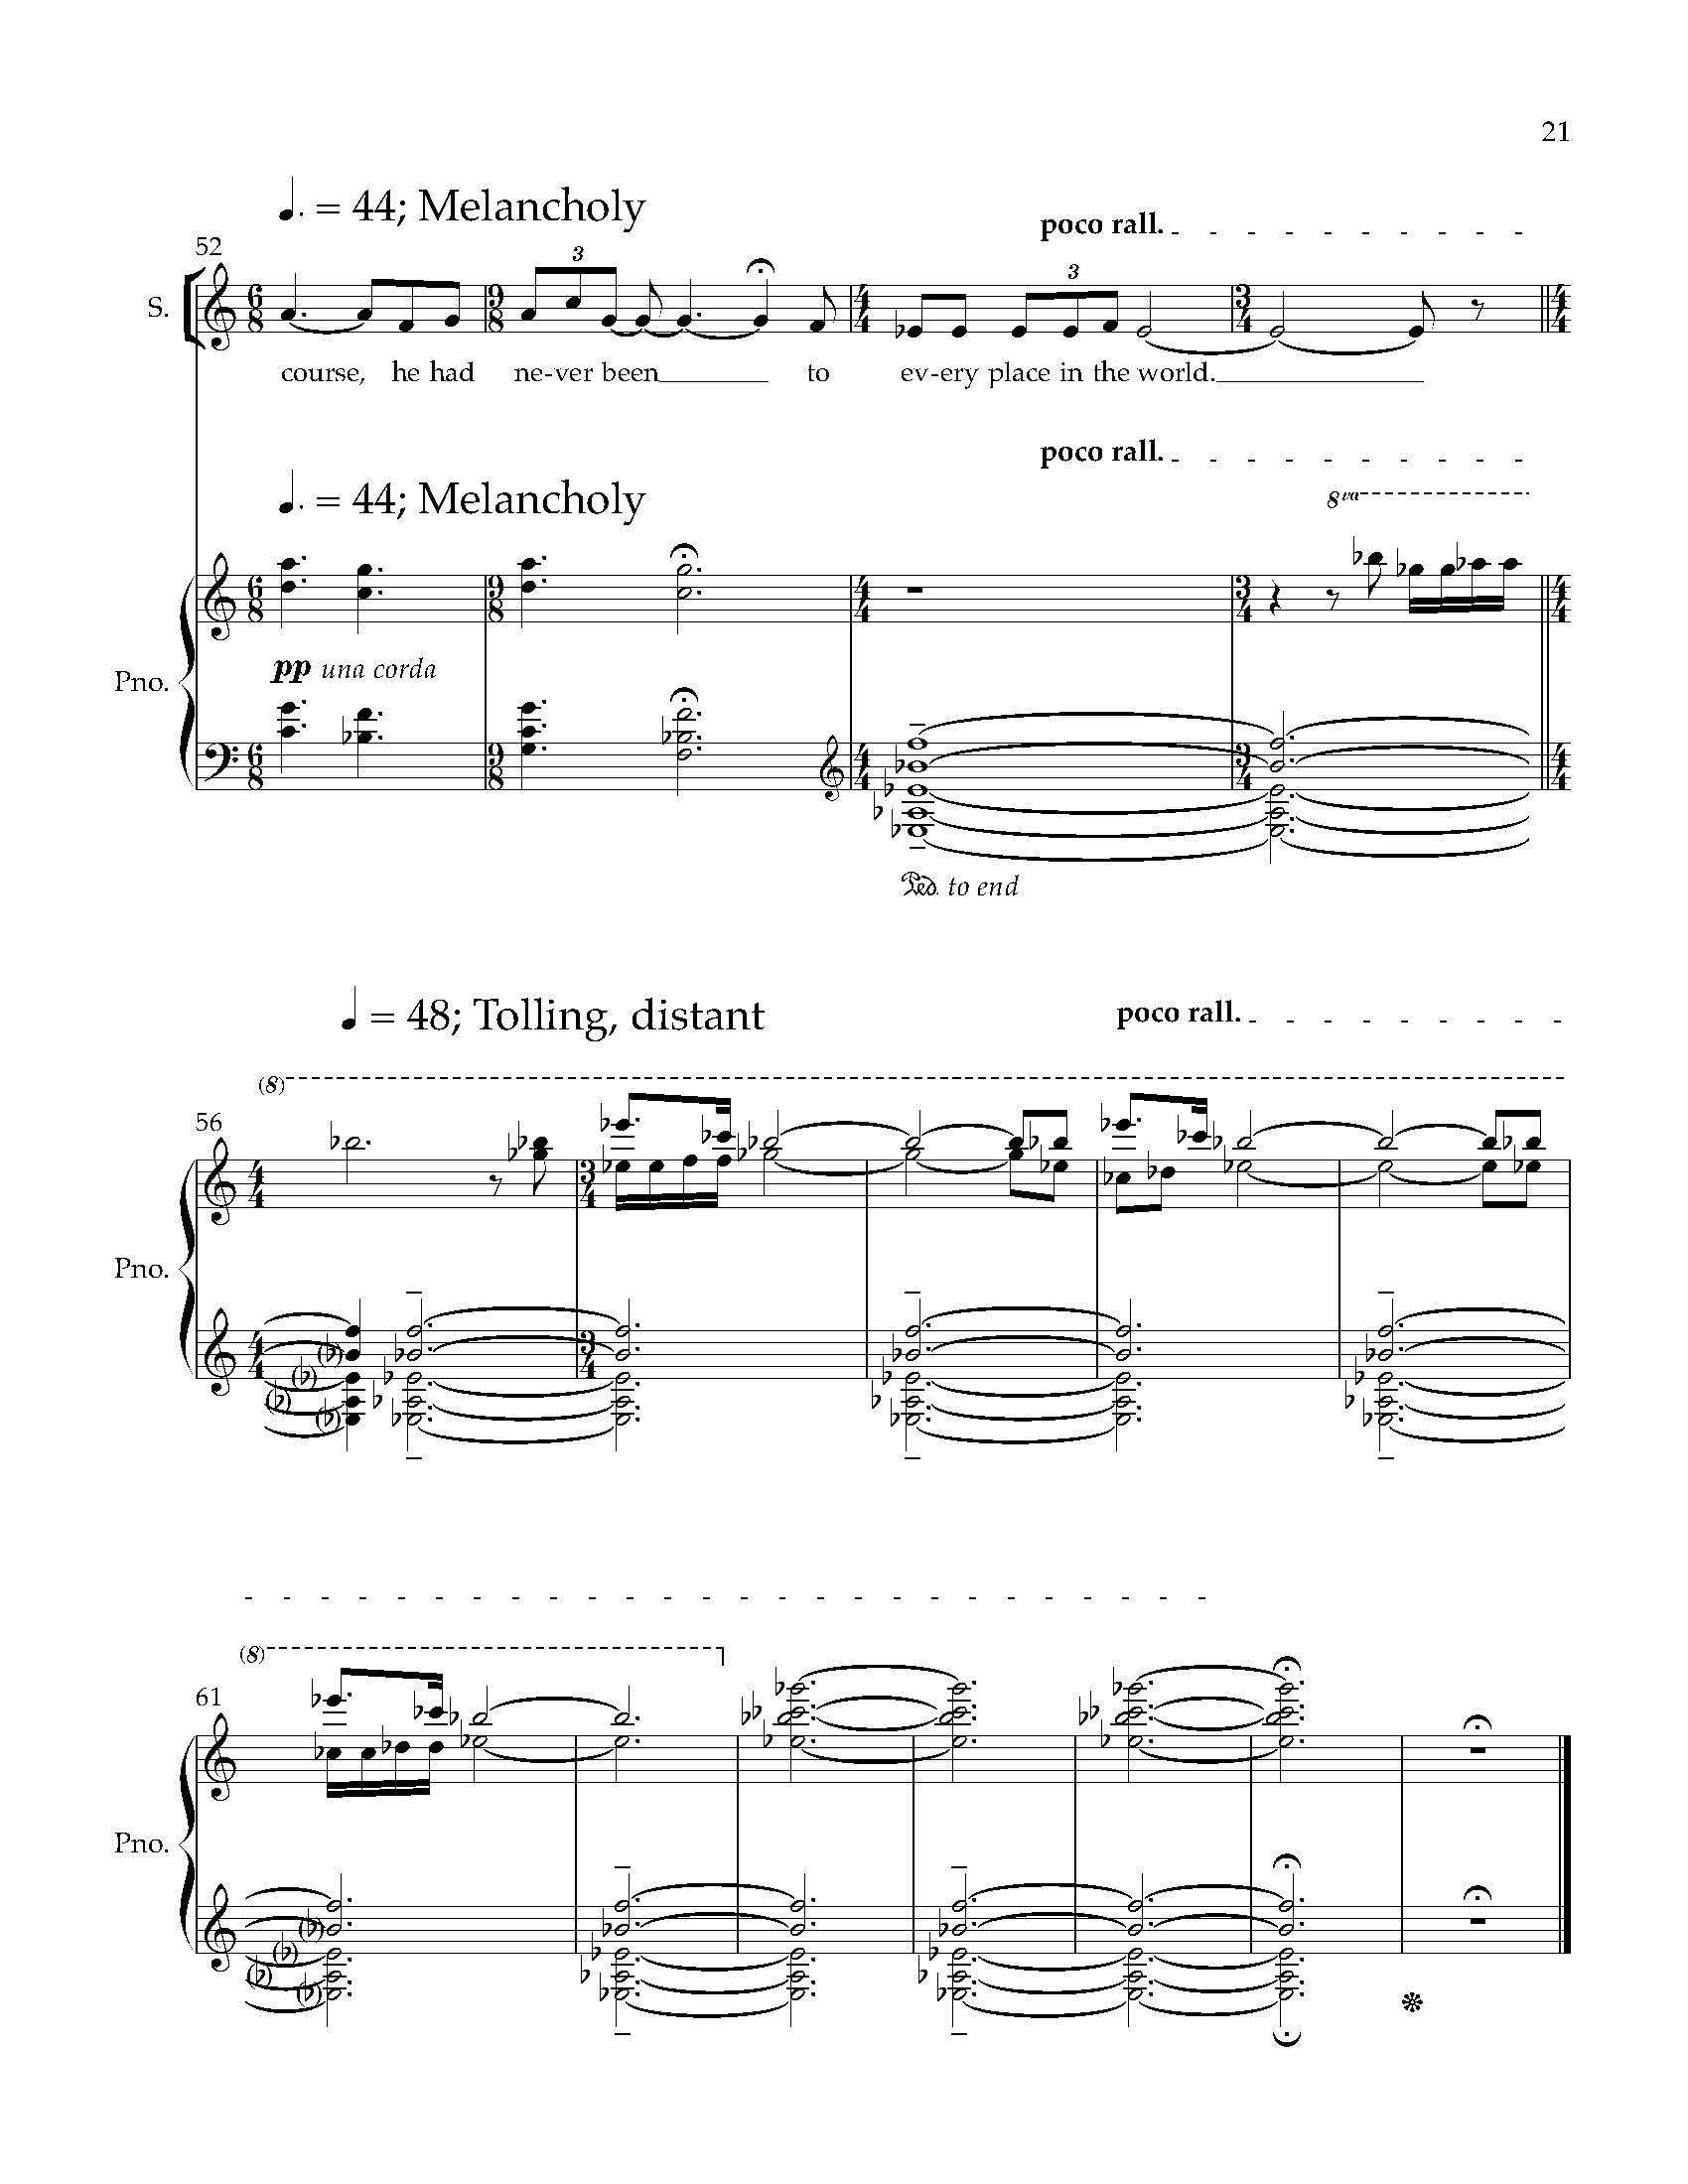 Sky - Complete Score (Revised)_Page_27.jpg